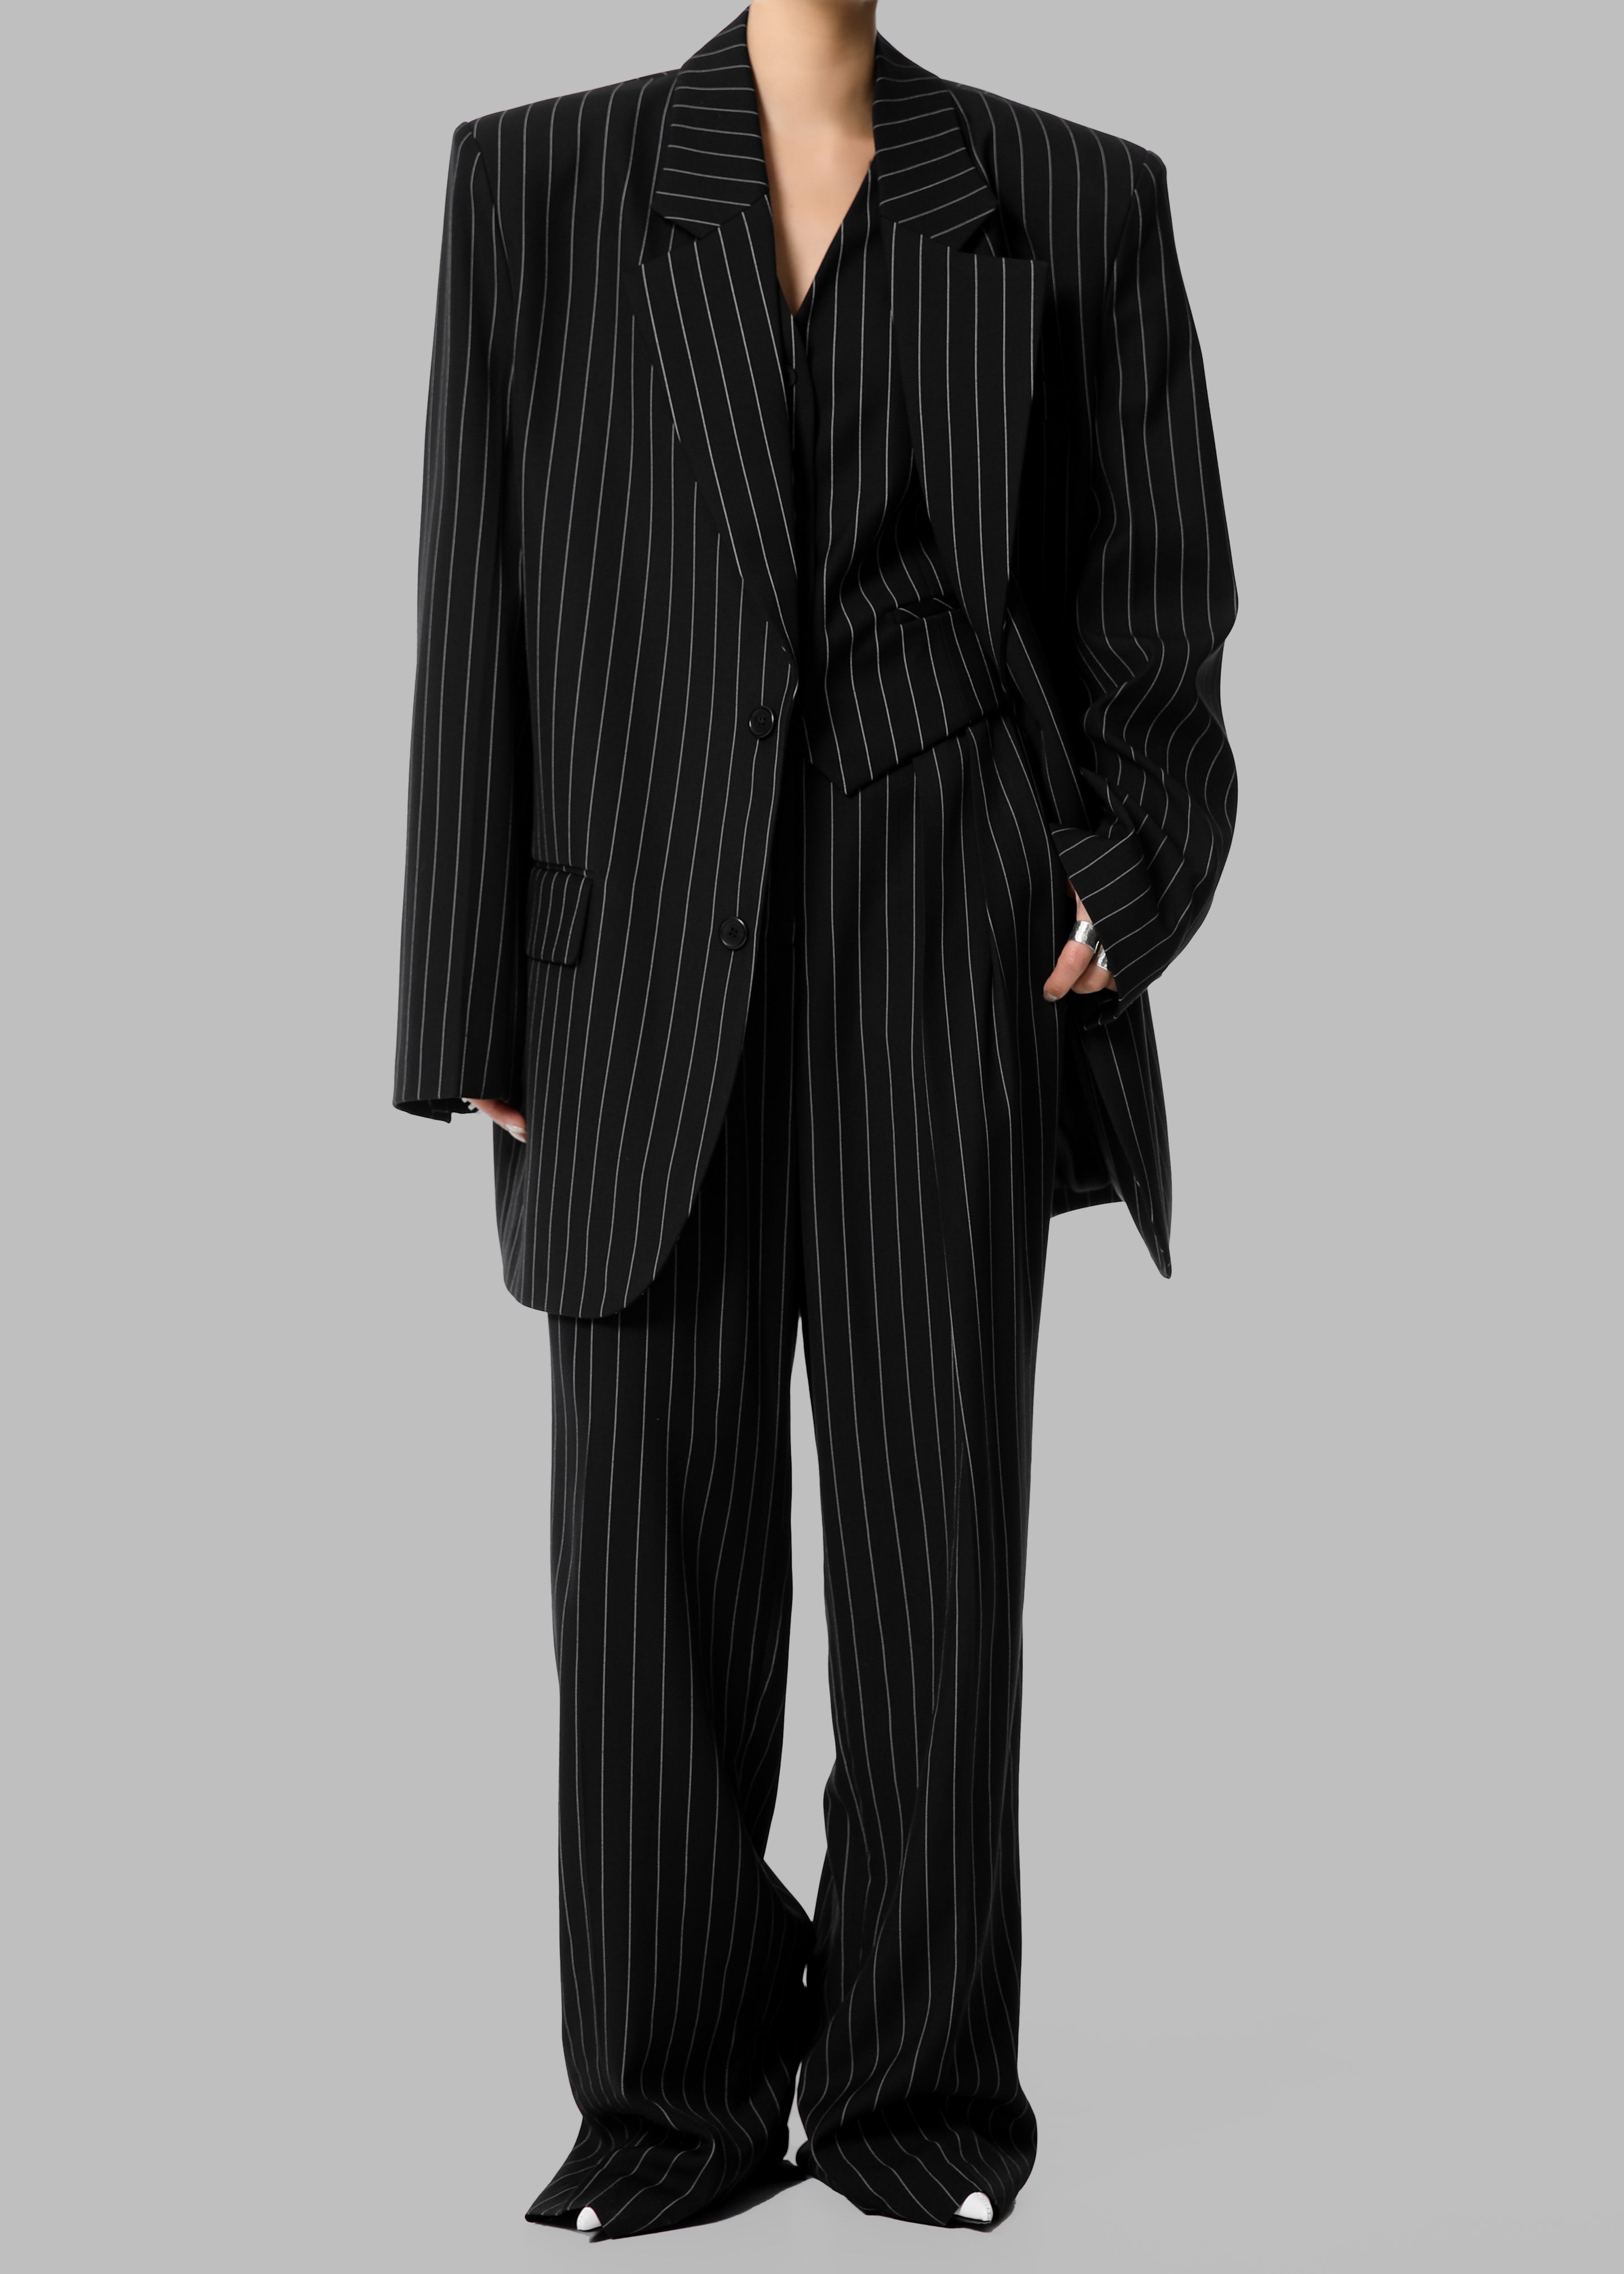 Holland Pleated Trousers - Black/White Pinstripe - 3